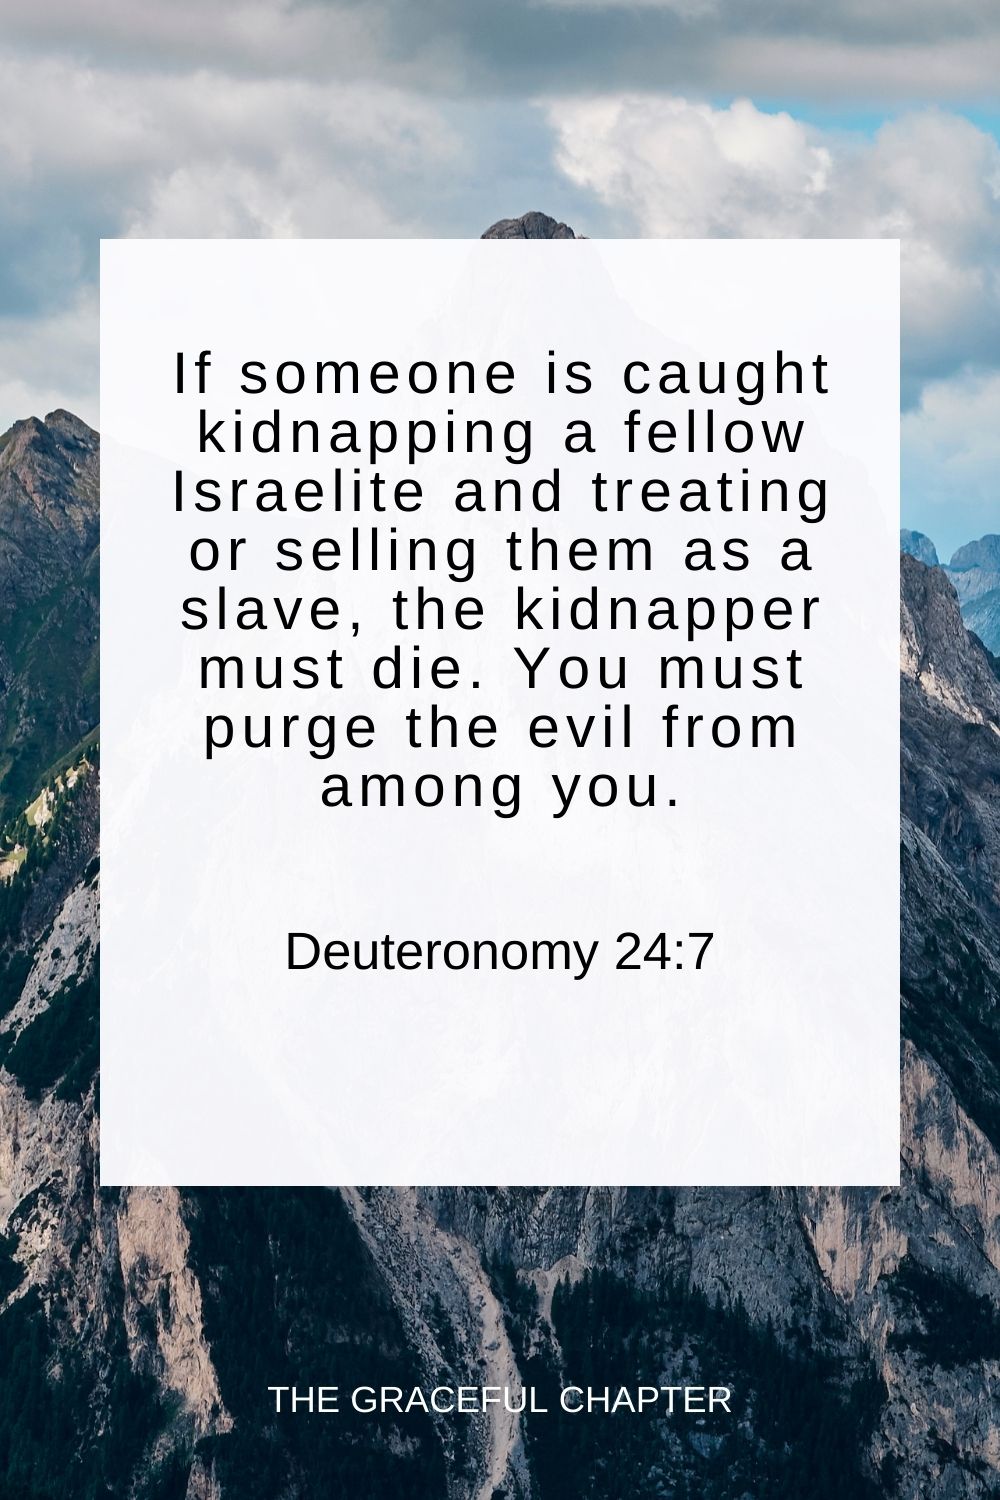 If someone is caught kidnapping a fellow Israelite and treating or selling them as a slave, the kidnapper must die. You must purge the evil from among you. Deuteronomy 24:7